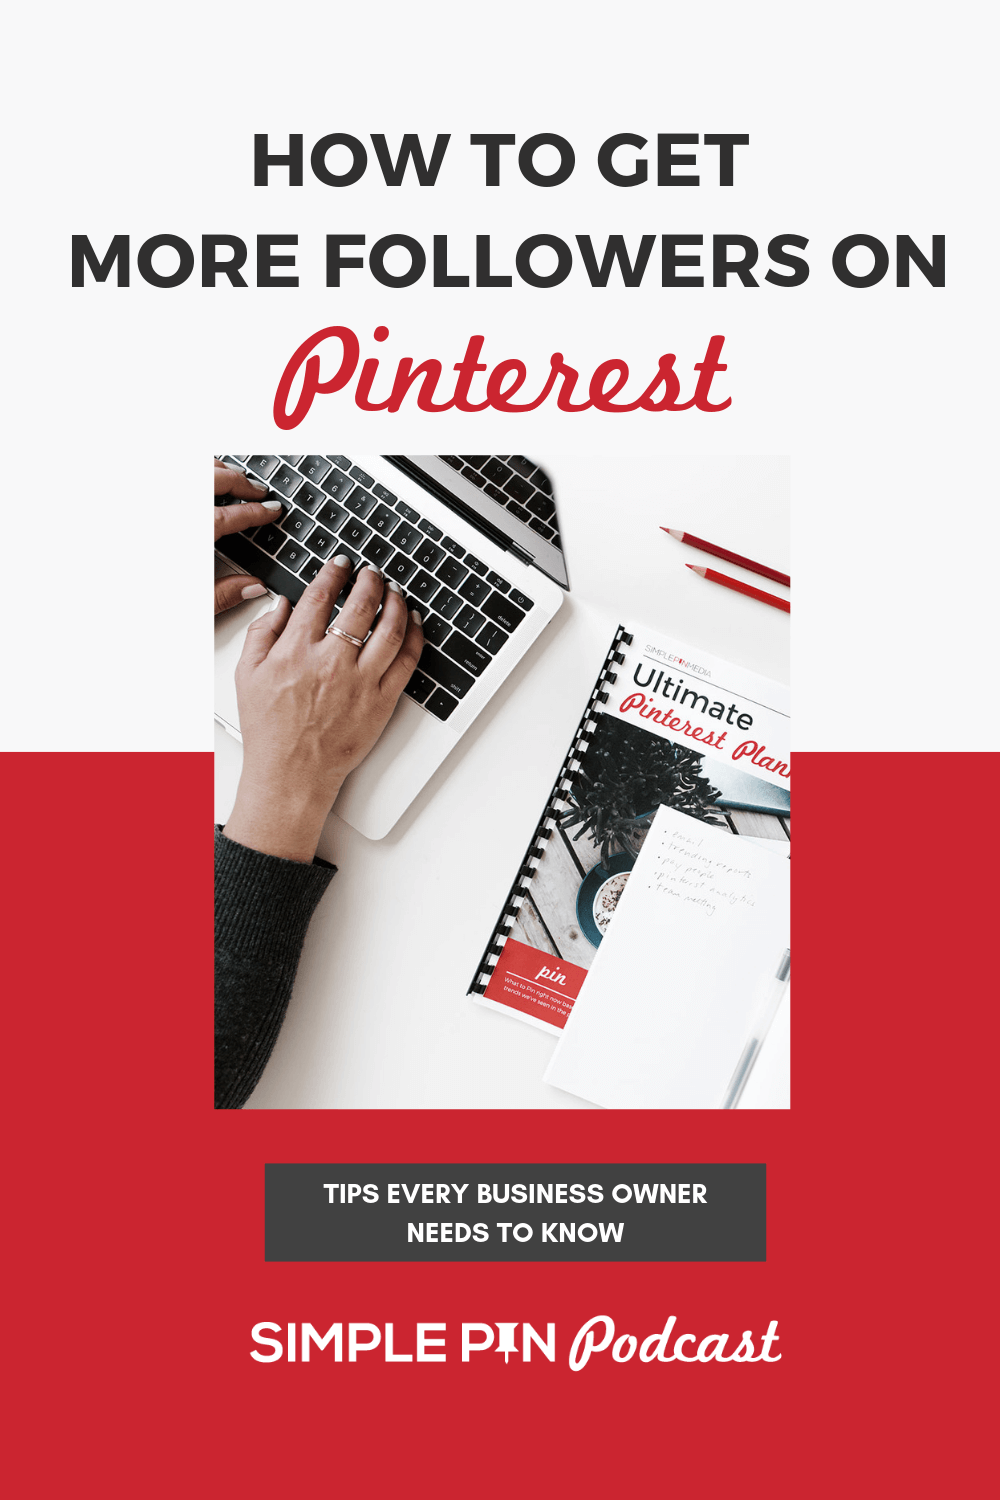 woman typing on laptop with text overlay "How to get more followers on Pinterest".